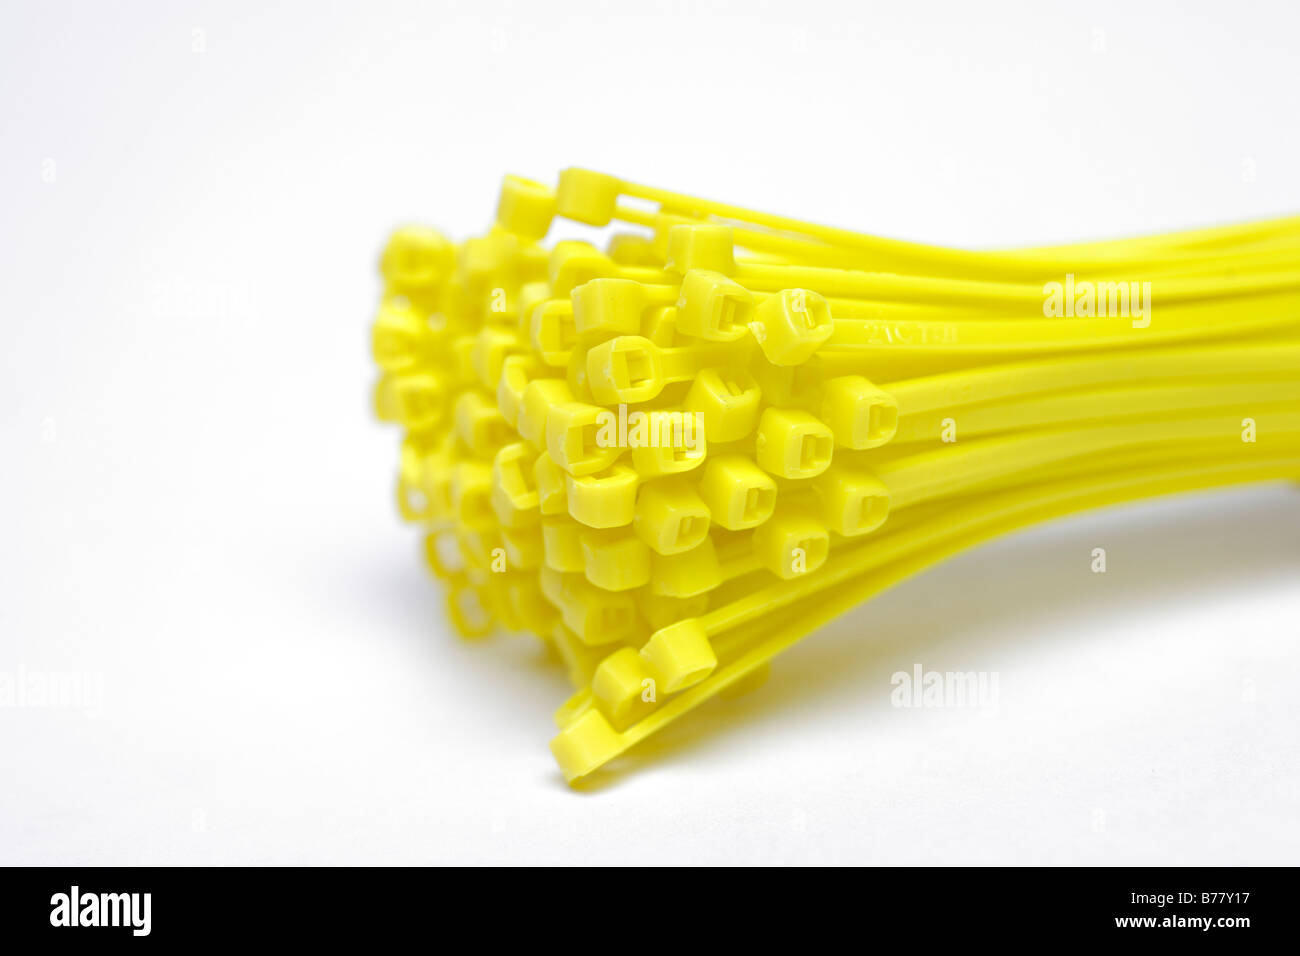 Plastic cable ties, Cut Out, Studio, White background Stock Photo